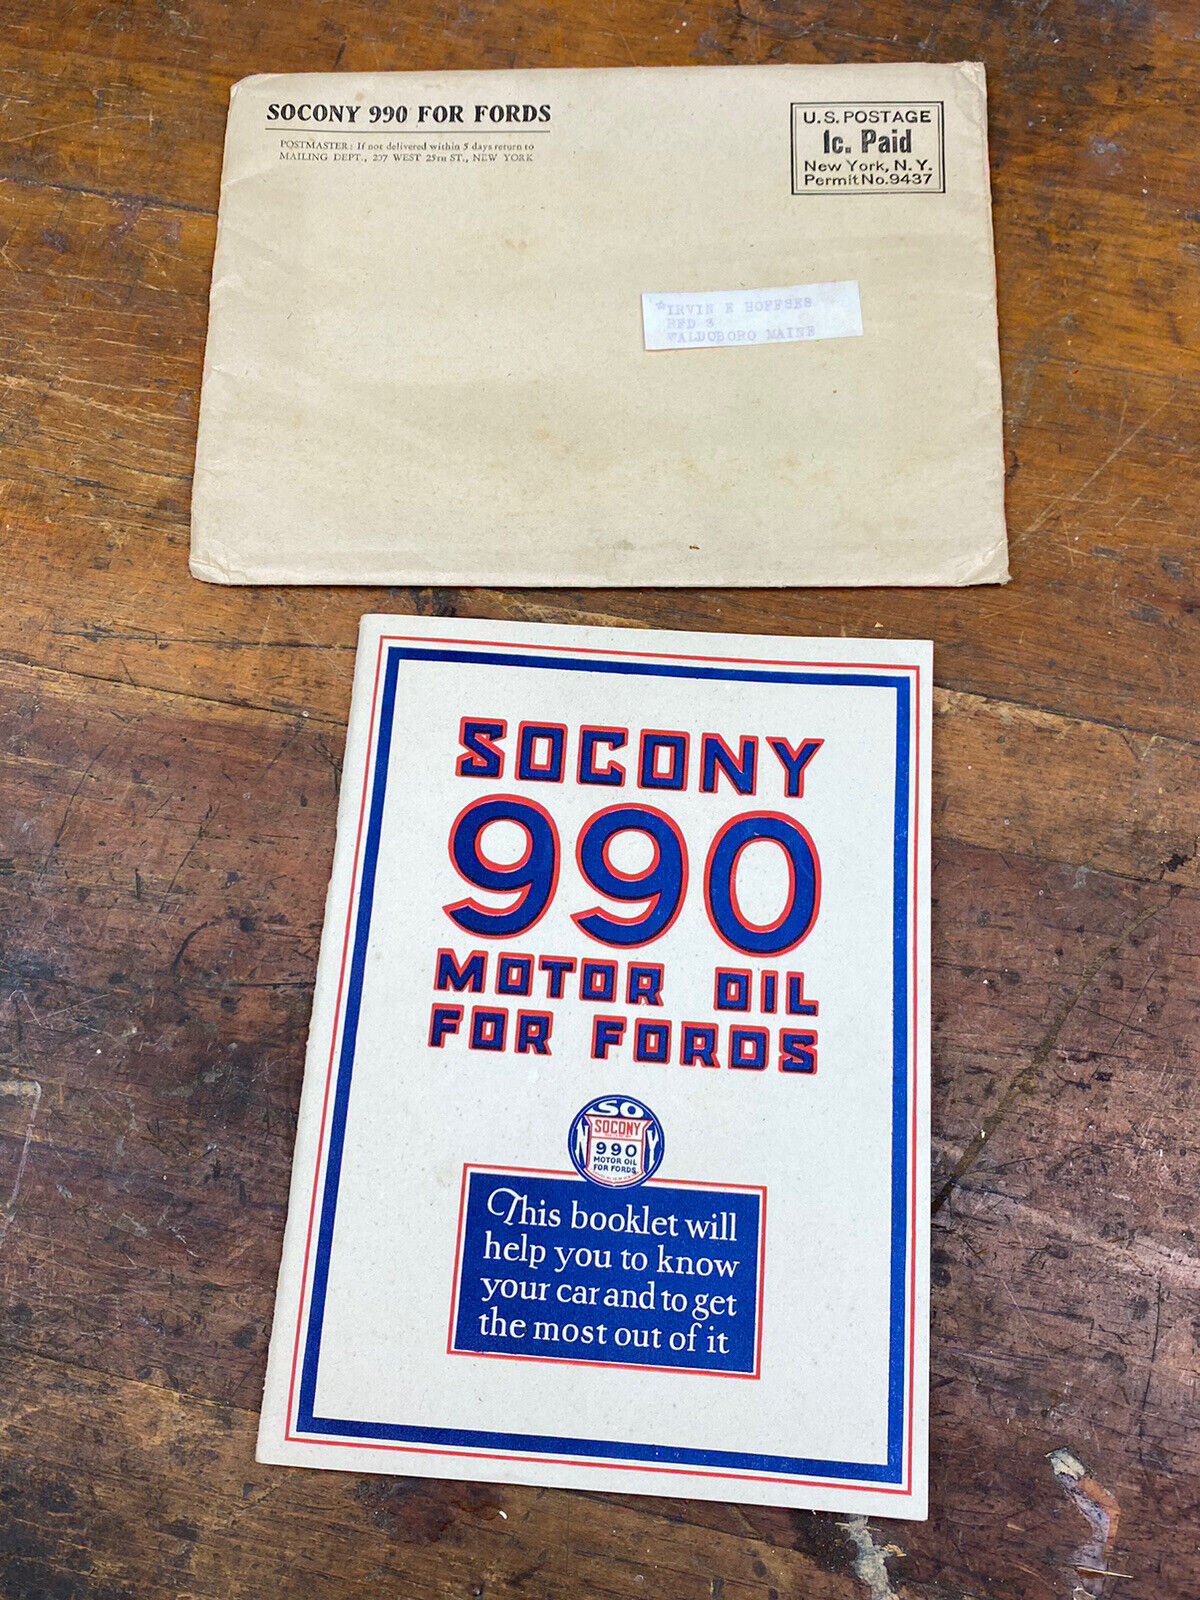 1927 SOCONY 990 Motor Oil for FORDS Booklet w/ Original Envelope MINTY Condition